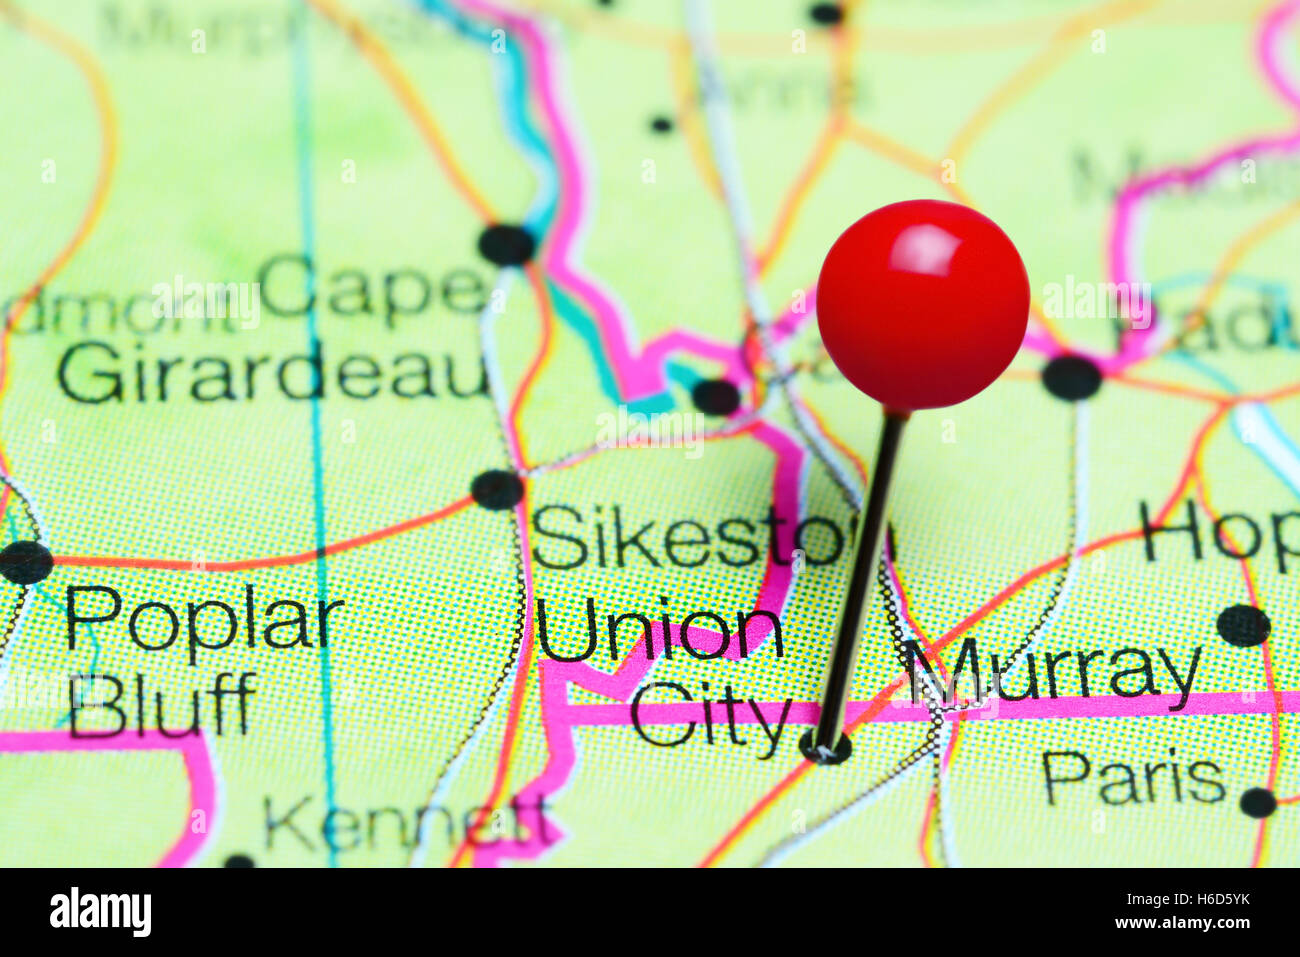 Union City pinned on a map of Tennessee, USA Stock Photo